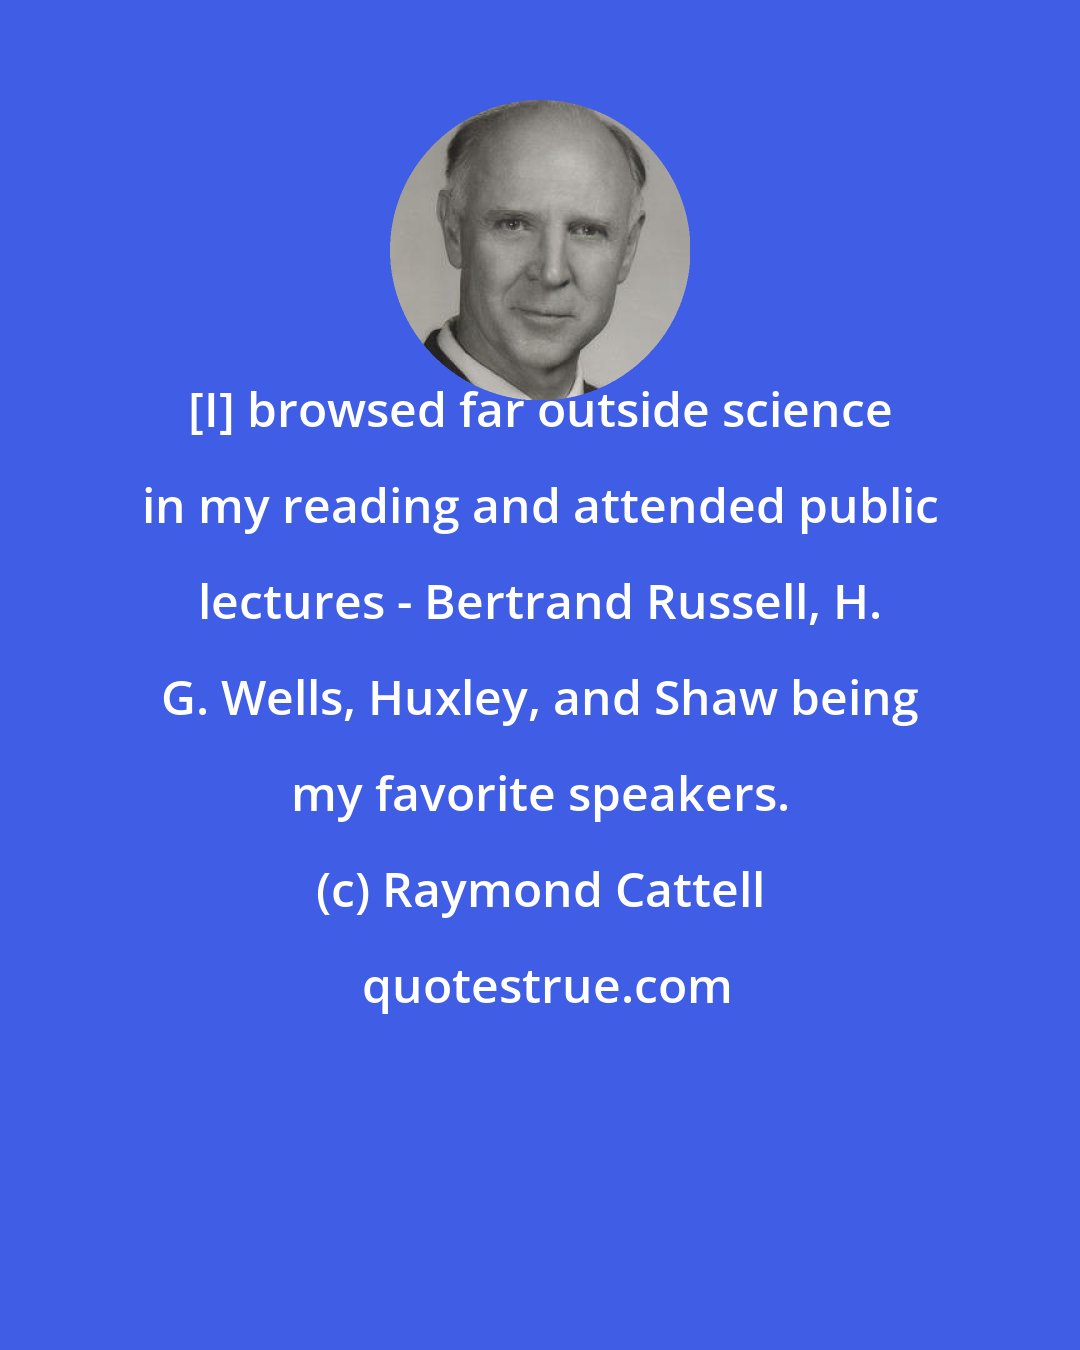 Raymond Cattell: [I] browsed far outside science in my reading and attended public lectures - Bertrand Russell, H. G. Wells, Huxley, and Shaw being my favorite speakers.